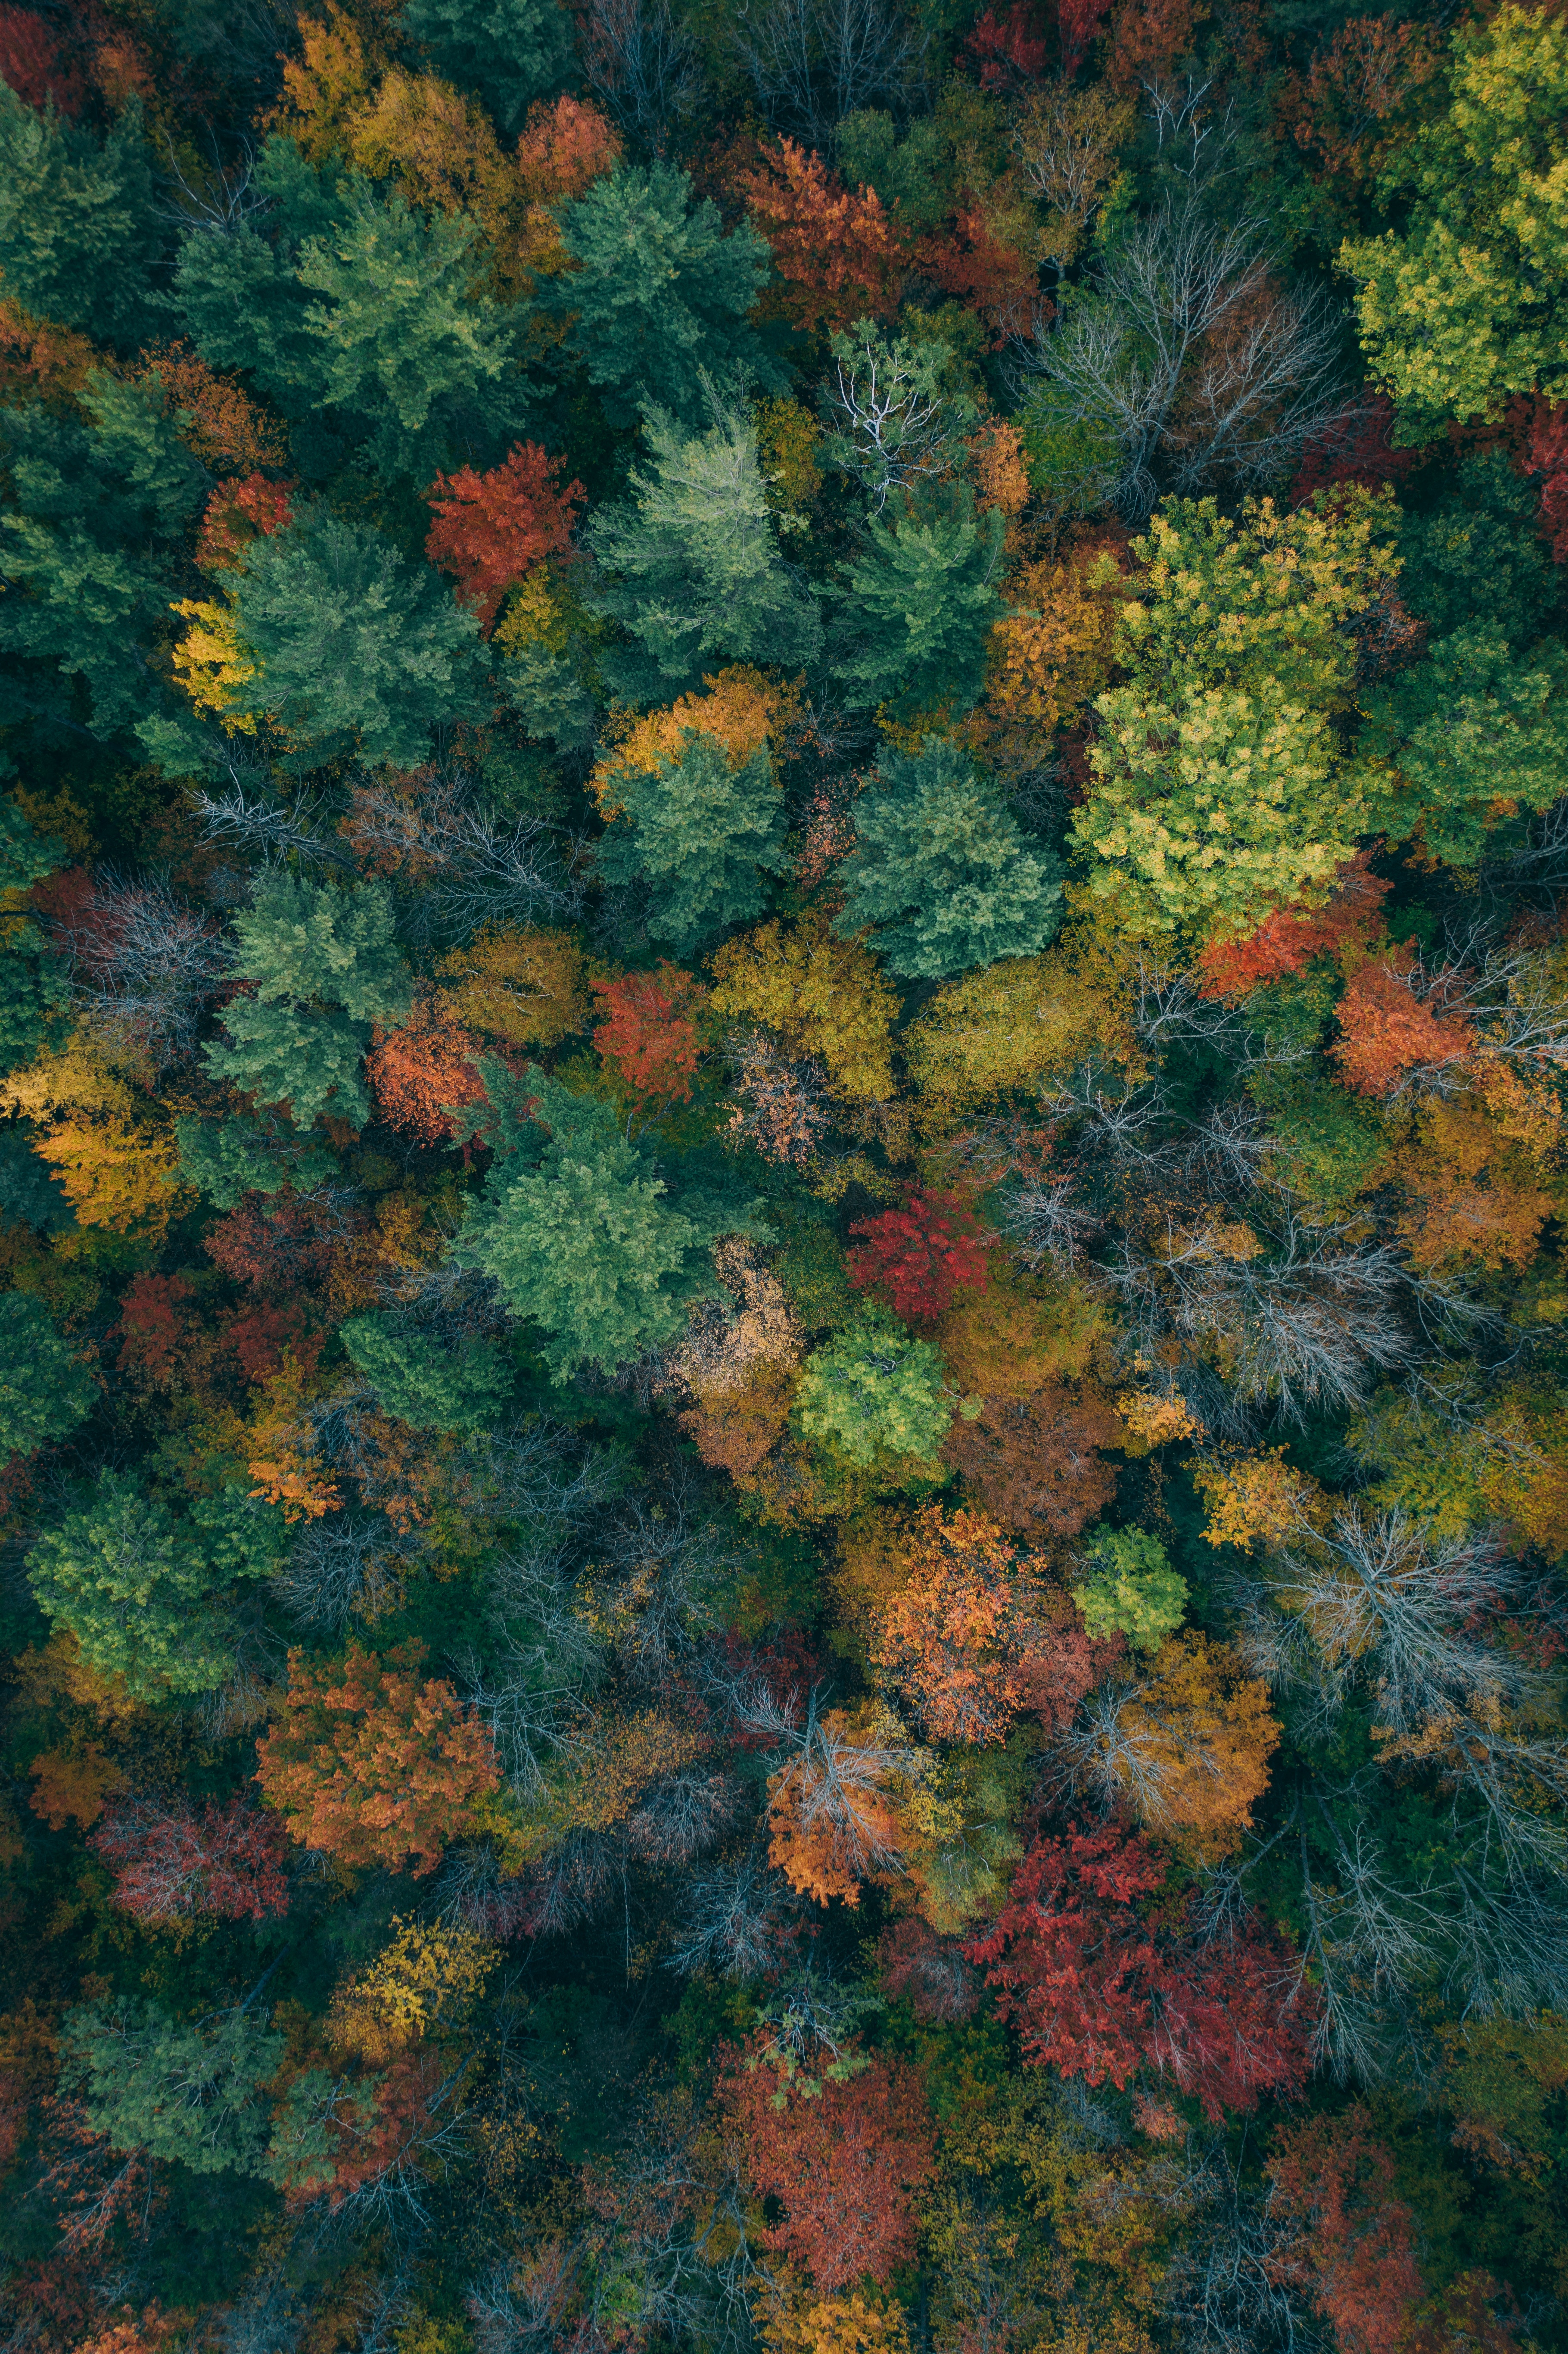 Mobile wallpaper colorful, forest, nature, autumn colors, autumn, autumn paints, trees, view from above, colourful